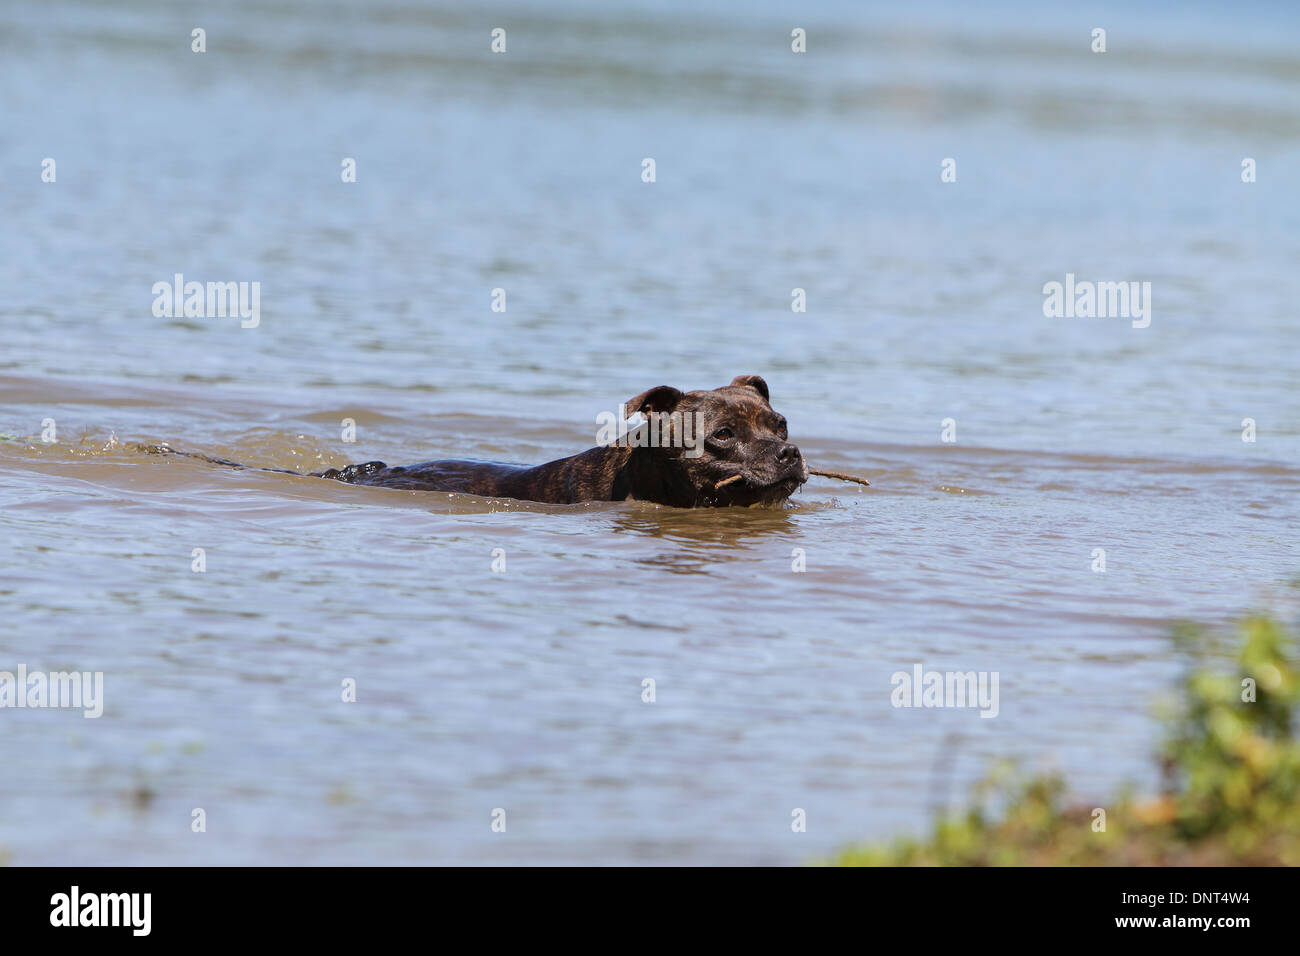 dog Staffordshire Bull Terrier / Staffie   adult swimming with a stick in its mouth  in a lake Stock Photo